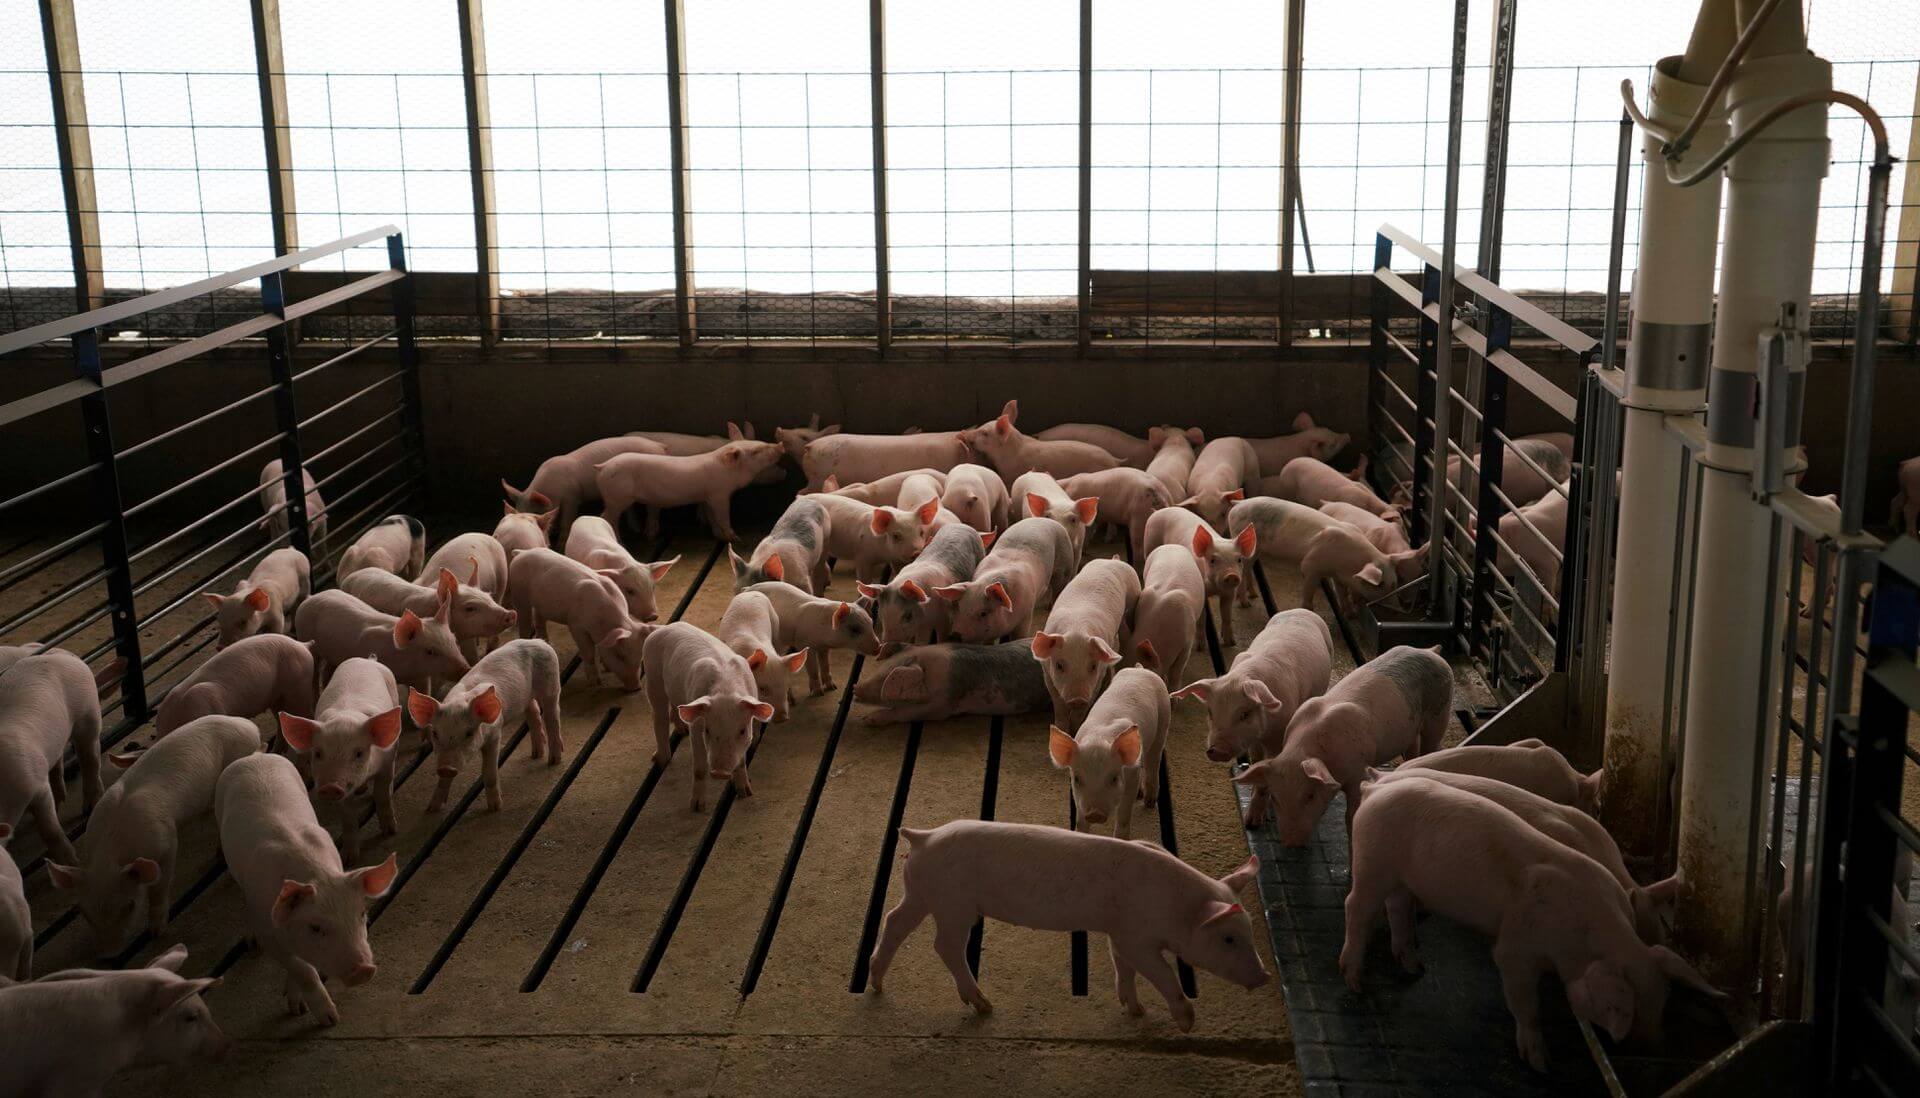 U.S. Supreme Court Upholds California’s Ban on Sale of Pork from Confined Pigs